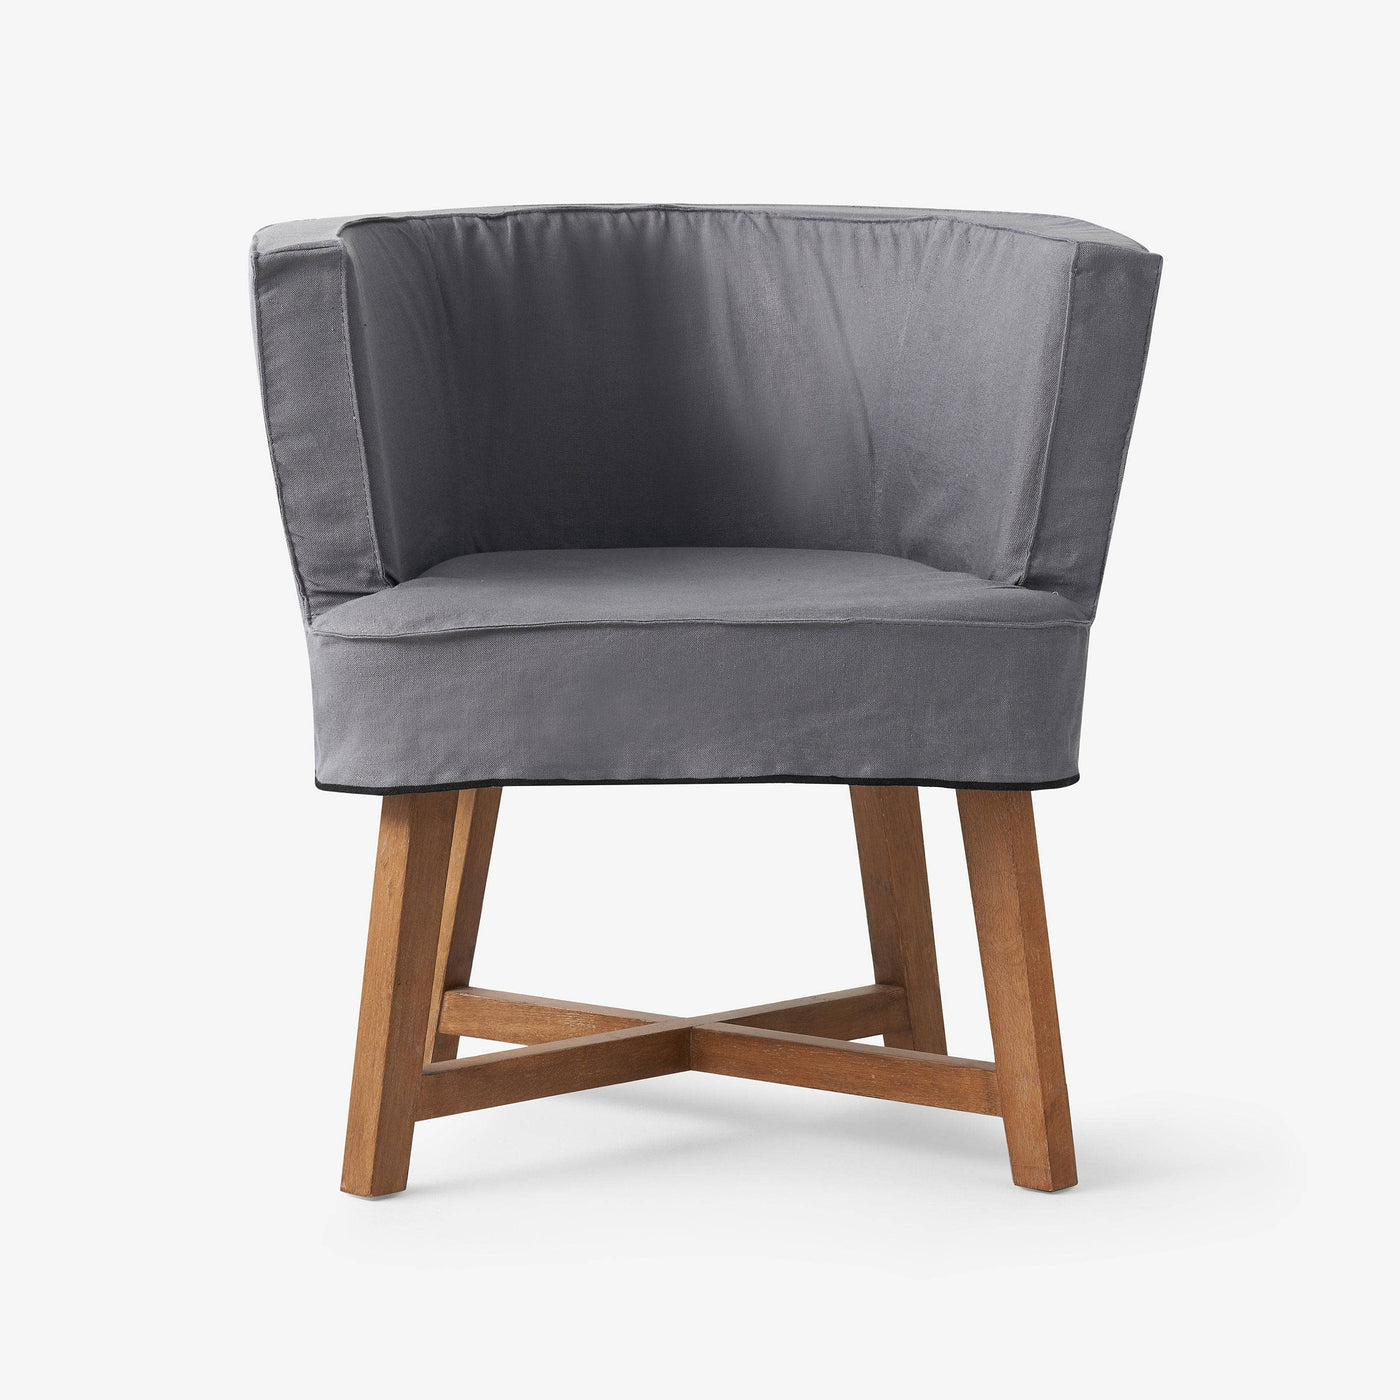 Leomis Accent Chair, Anthracite Grey Armchairs sazy.com